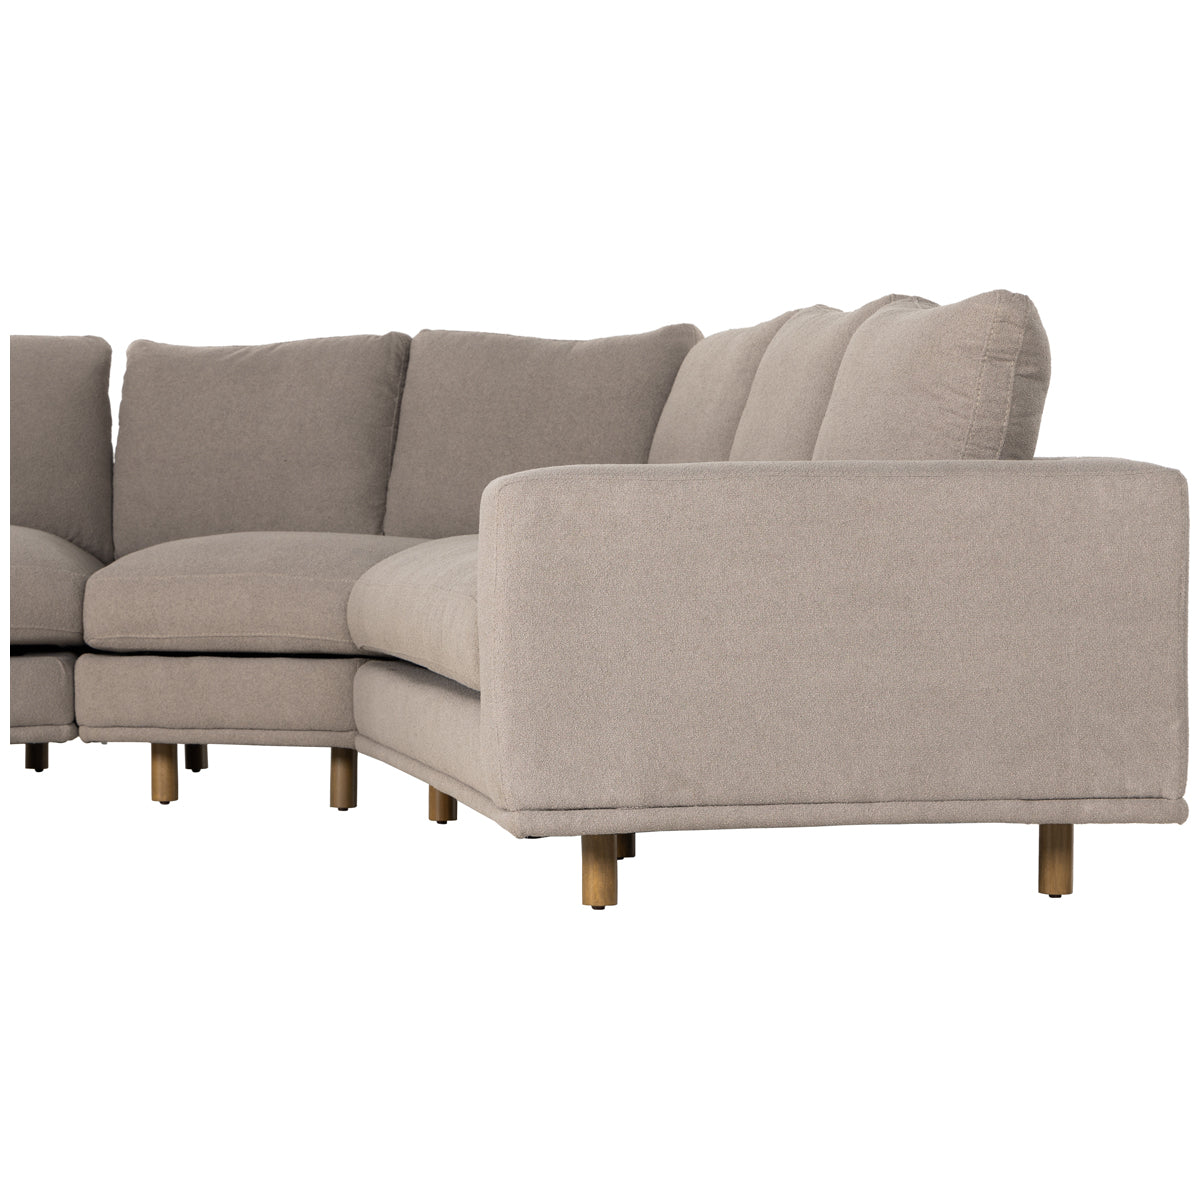 Four Hands Centrale Dom Small Wedge 3-Piece Sectional - Cobblestone